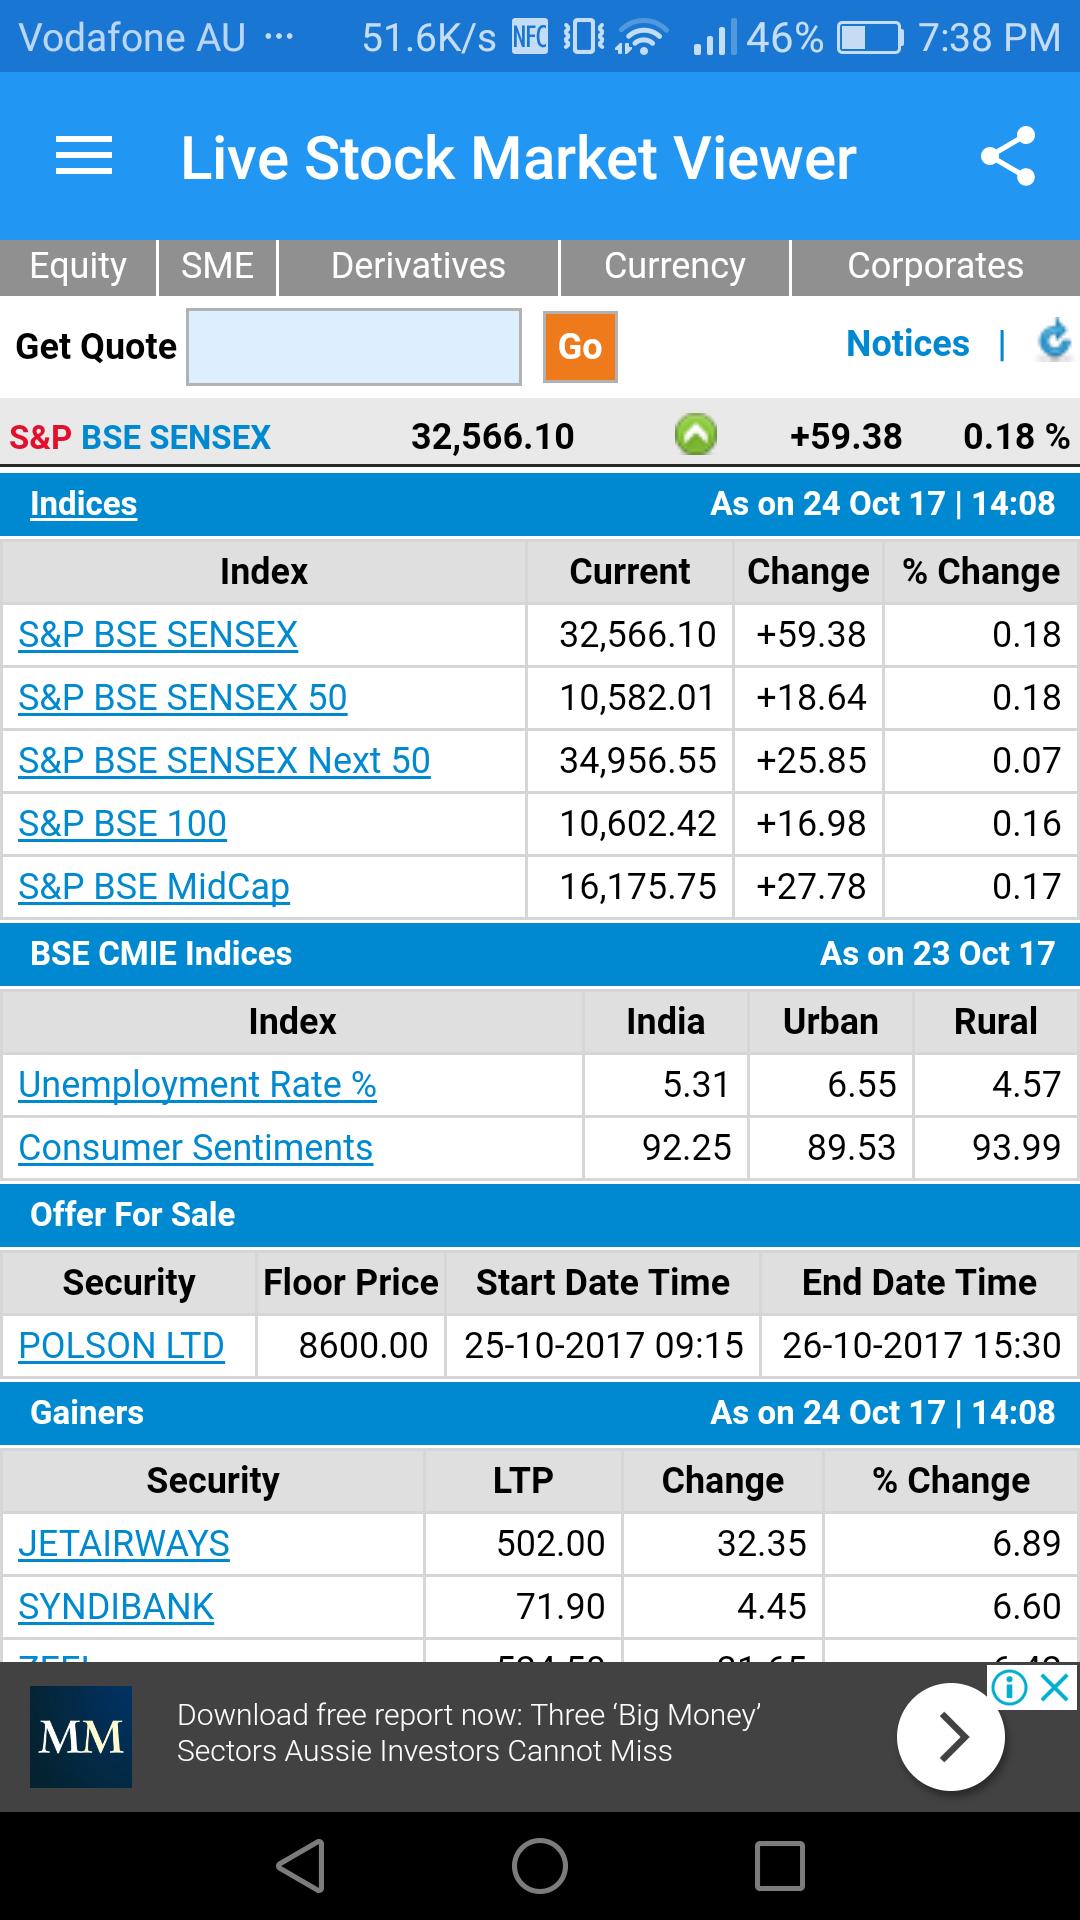 Live Stock Market Bse Nse Market Viewer For Android Apk Download